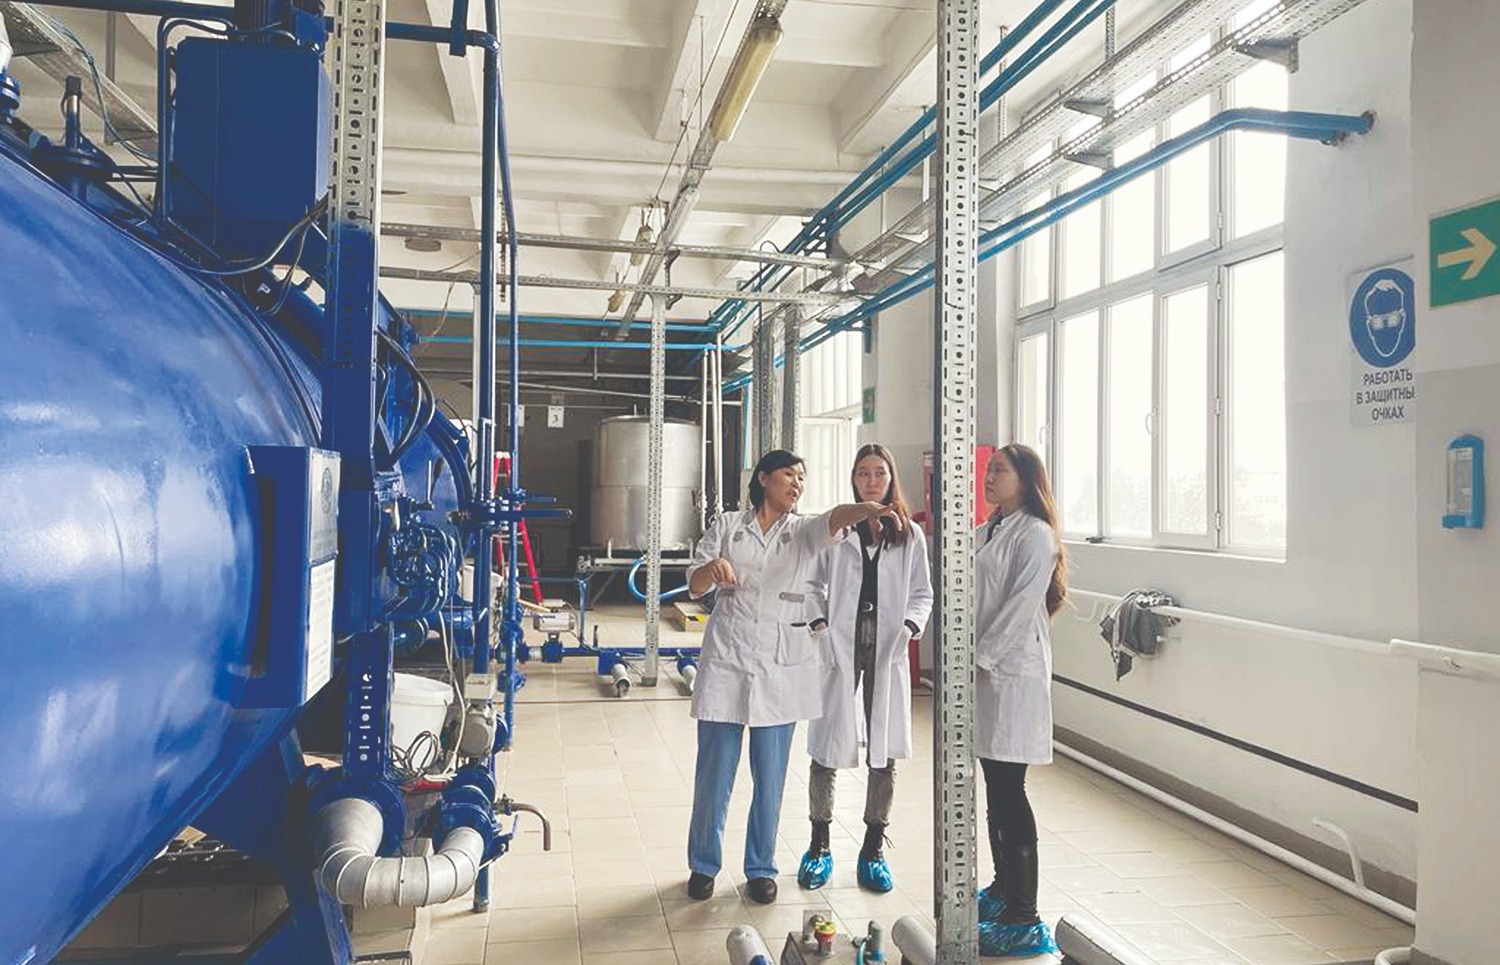 Students visited the Eurasian Food Corporation plant